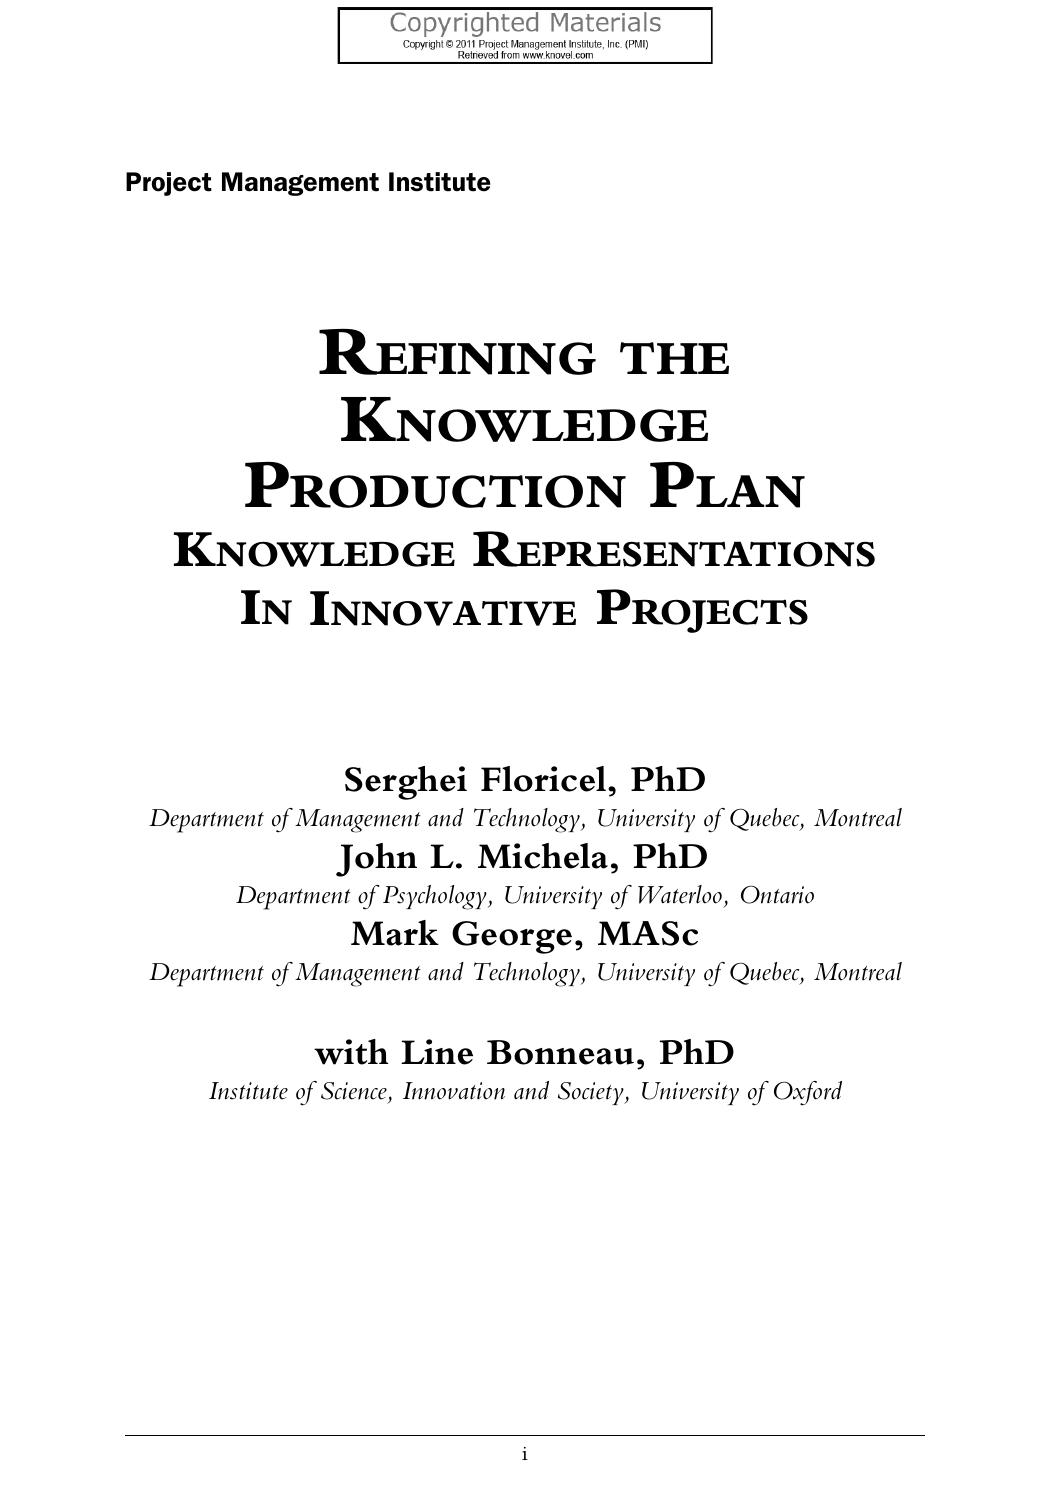 Refining the Knowledge Production Plan: Knowledge Representations in Innovation Projects